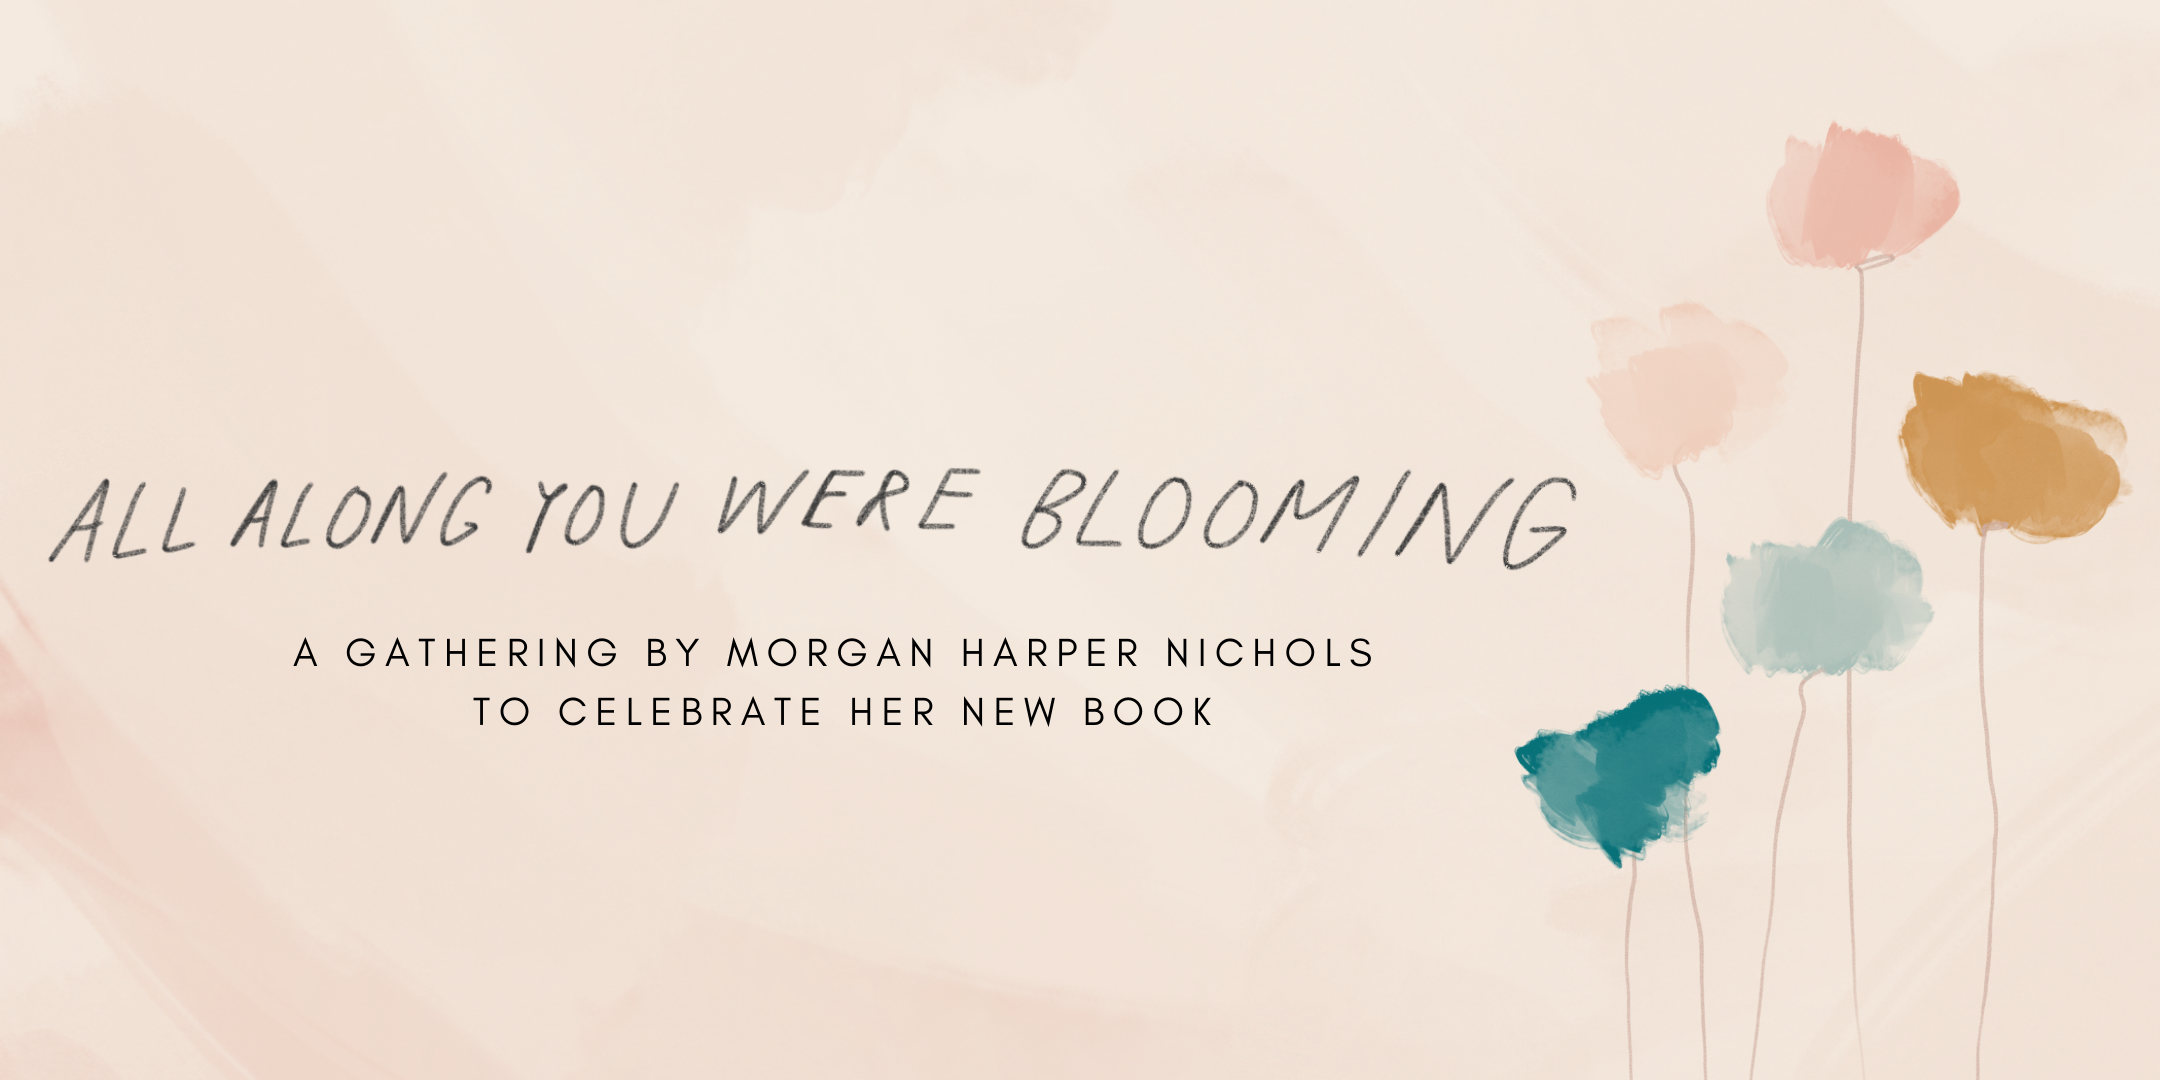 All Along You Were Blooming: A Gathering